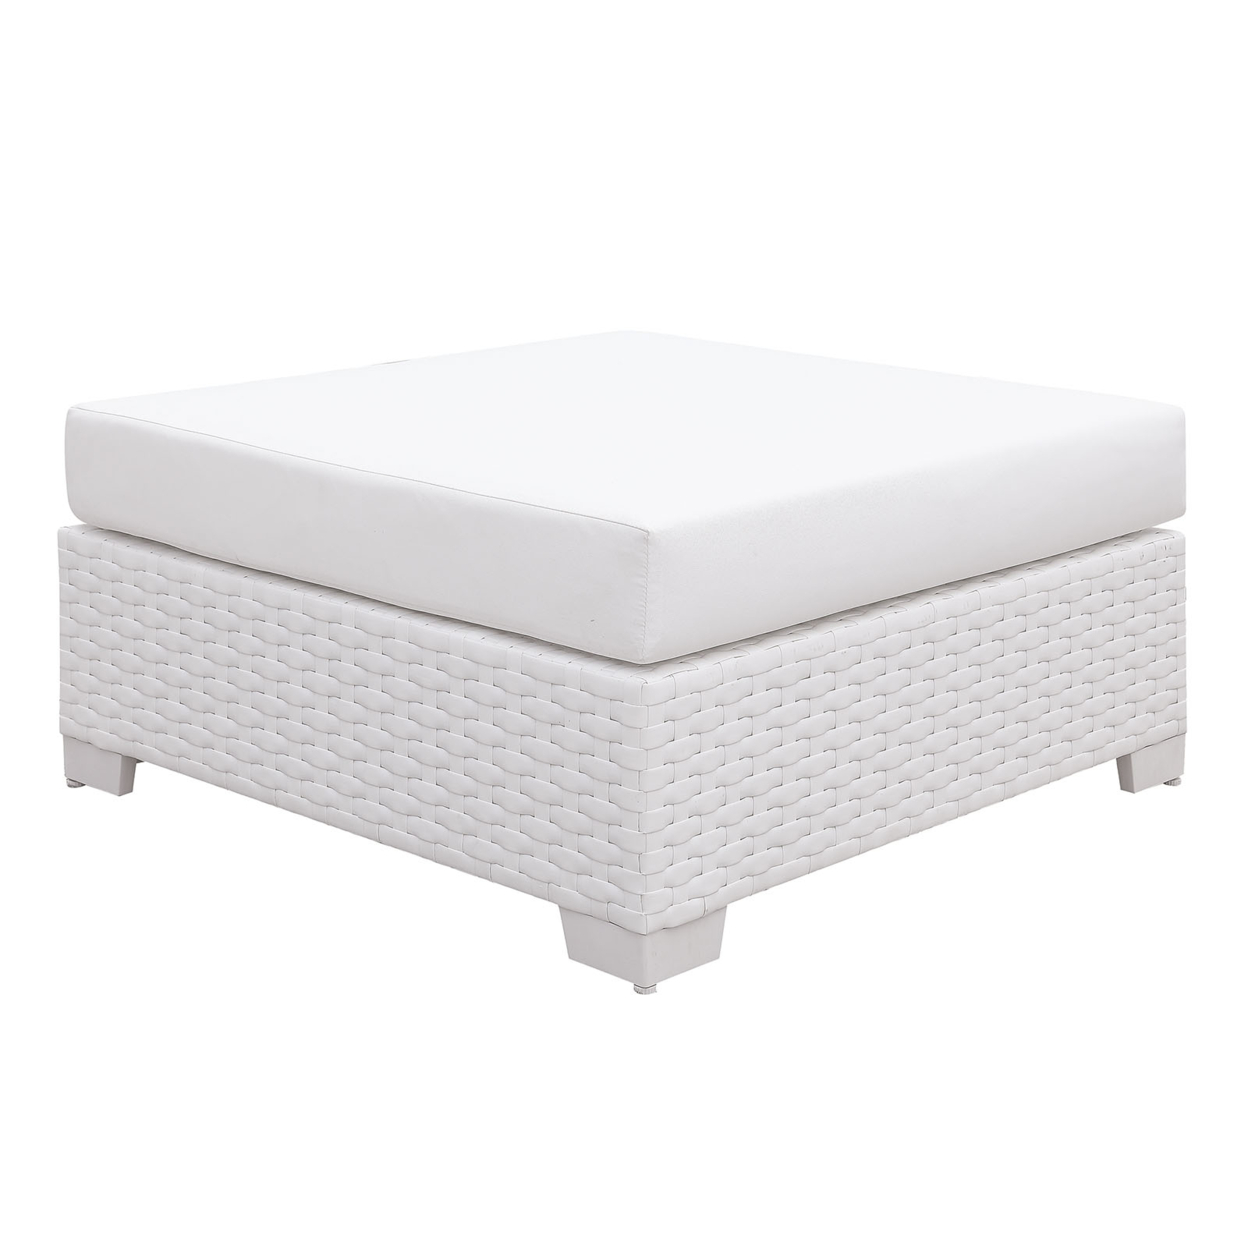 35 Inch Ottoman With Faux Polyester Padded Seat Cushion, White Wicker